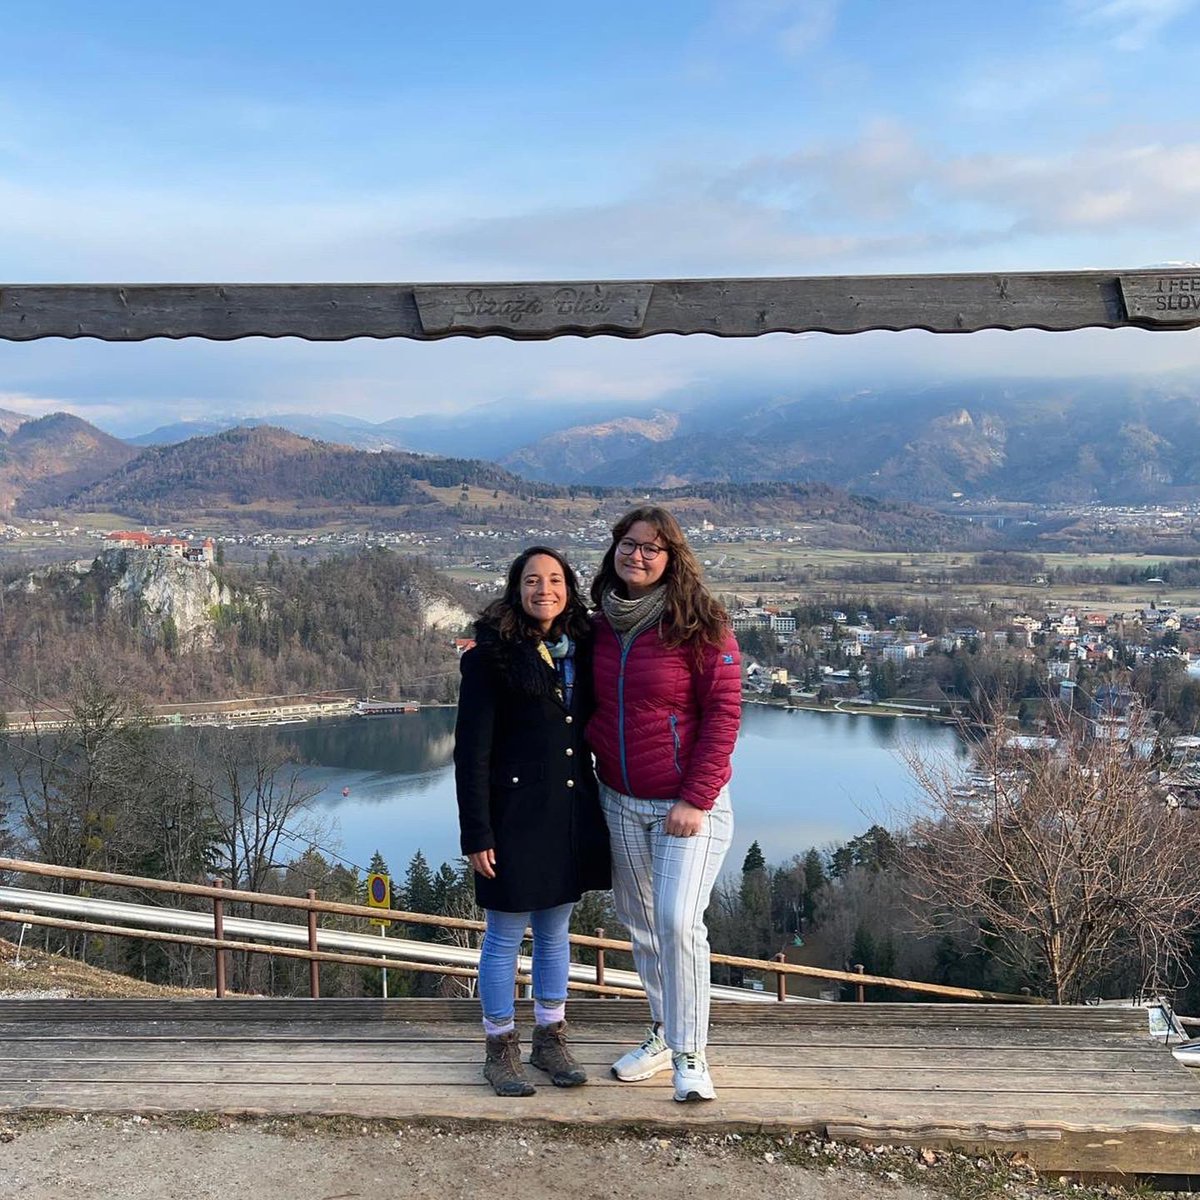 In 2024 the Youth Negotiators Academy is growing! 🚀 After our work at COP28, this is the first time our cofounders are reunited again 🥹💖 Swipe through to catch a glimpse of the four of them on their team retreat taking place this week in Bled, Slovenia 🇸🇮 #YouthNegotiators